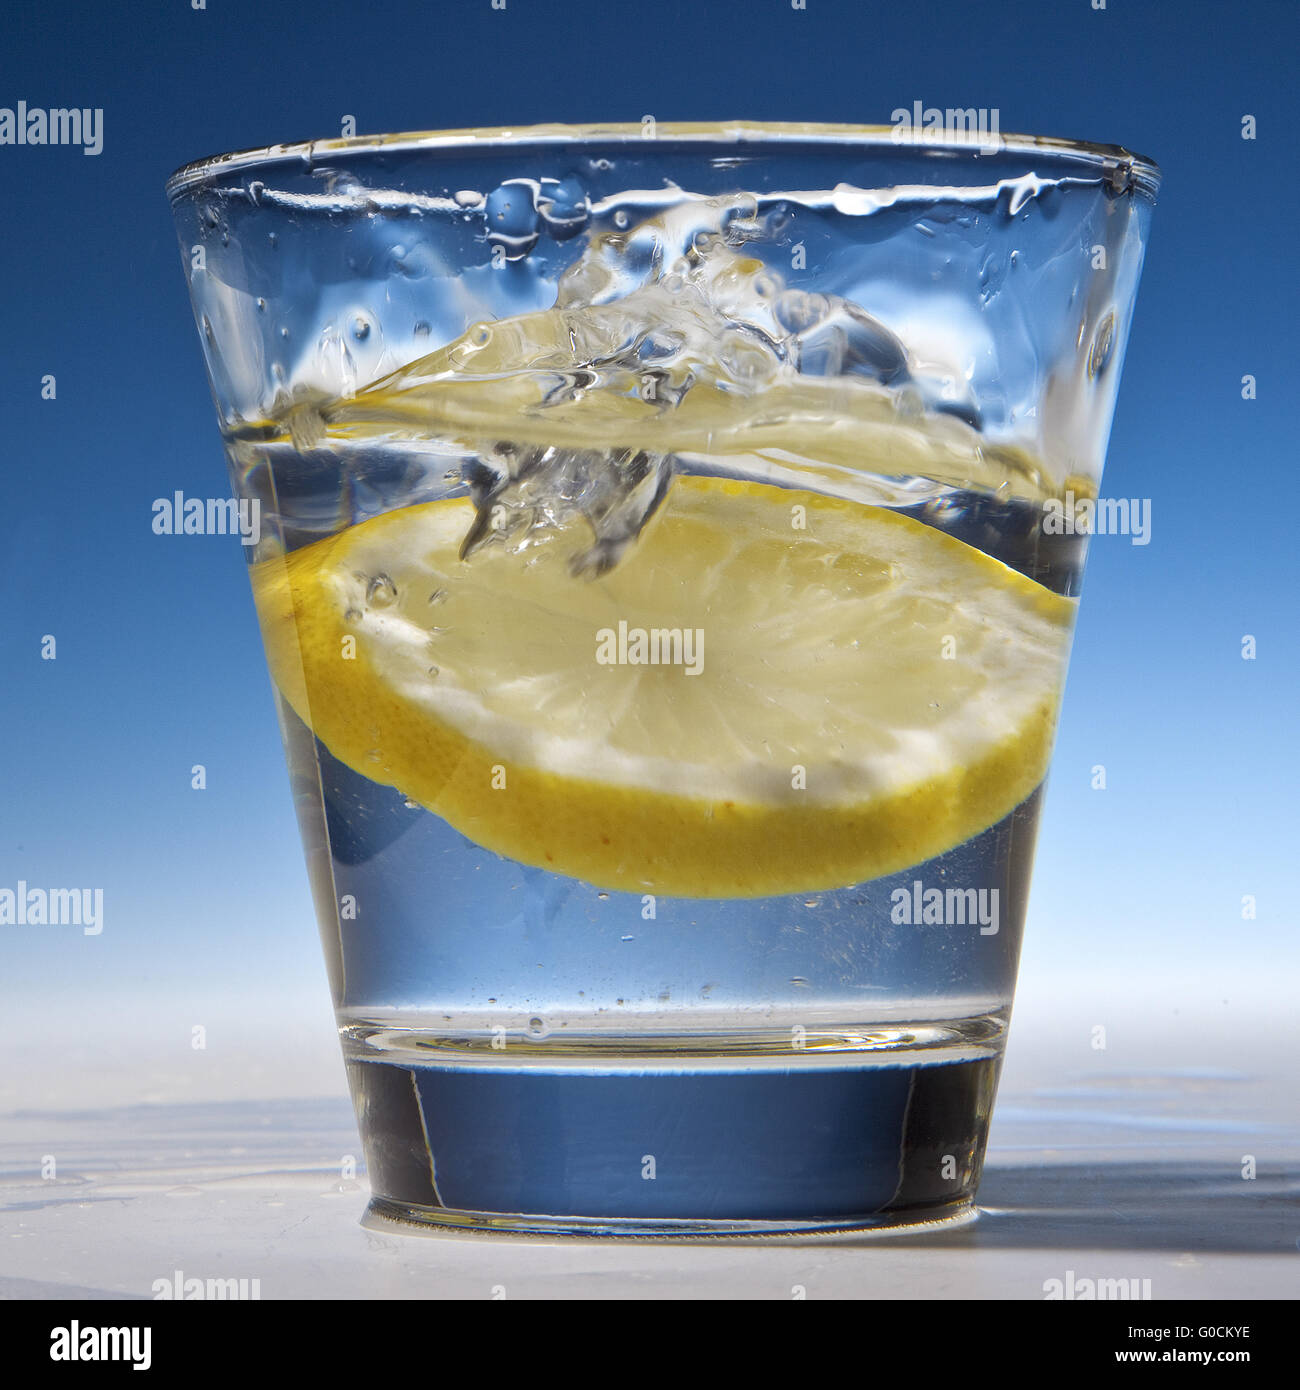 Slice of lemon falling into a glass with water Stock Photo